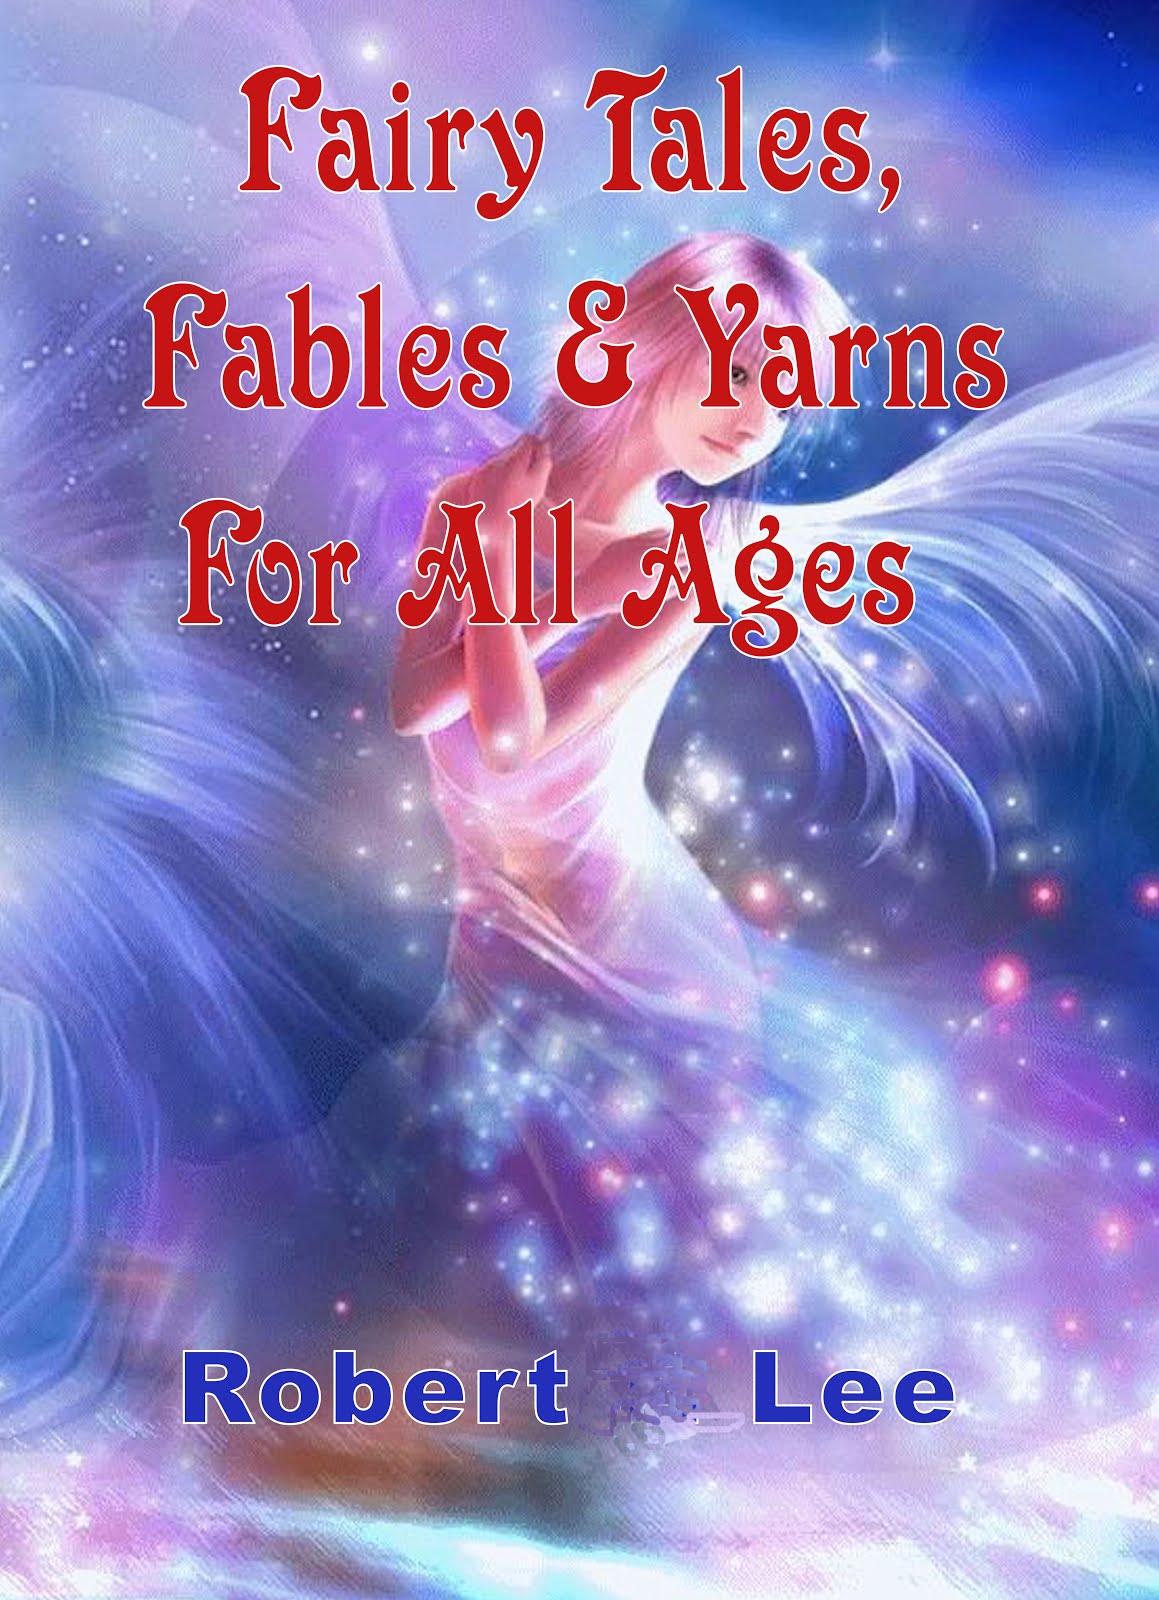 Fables for All Ages